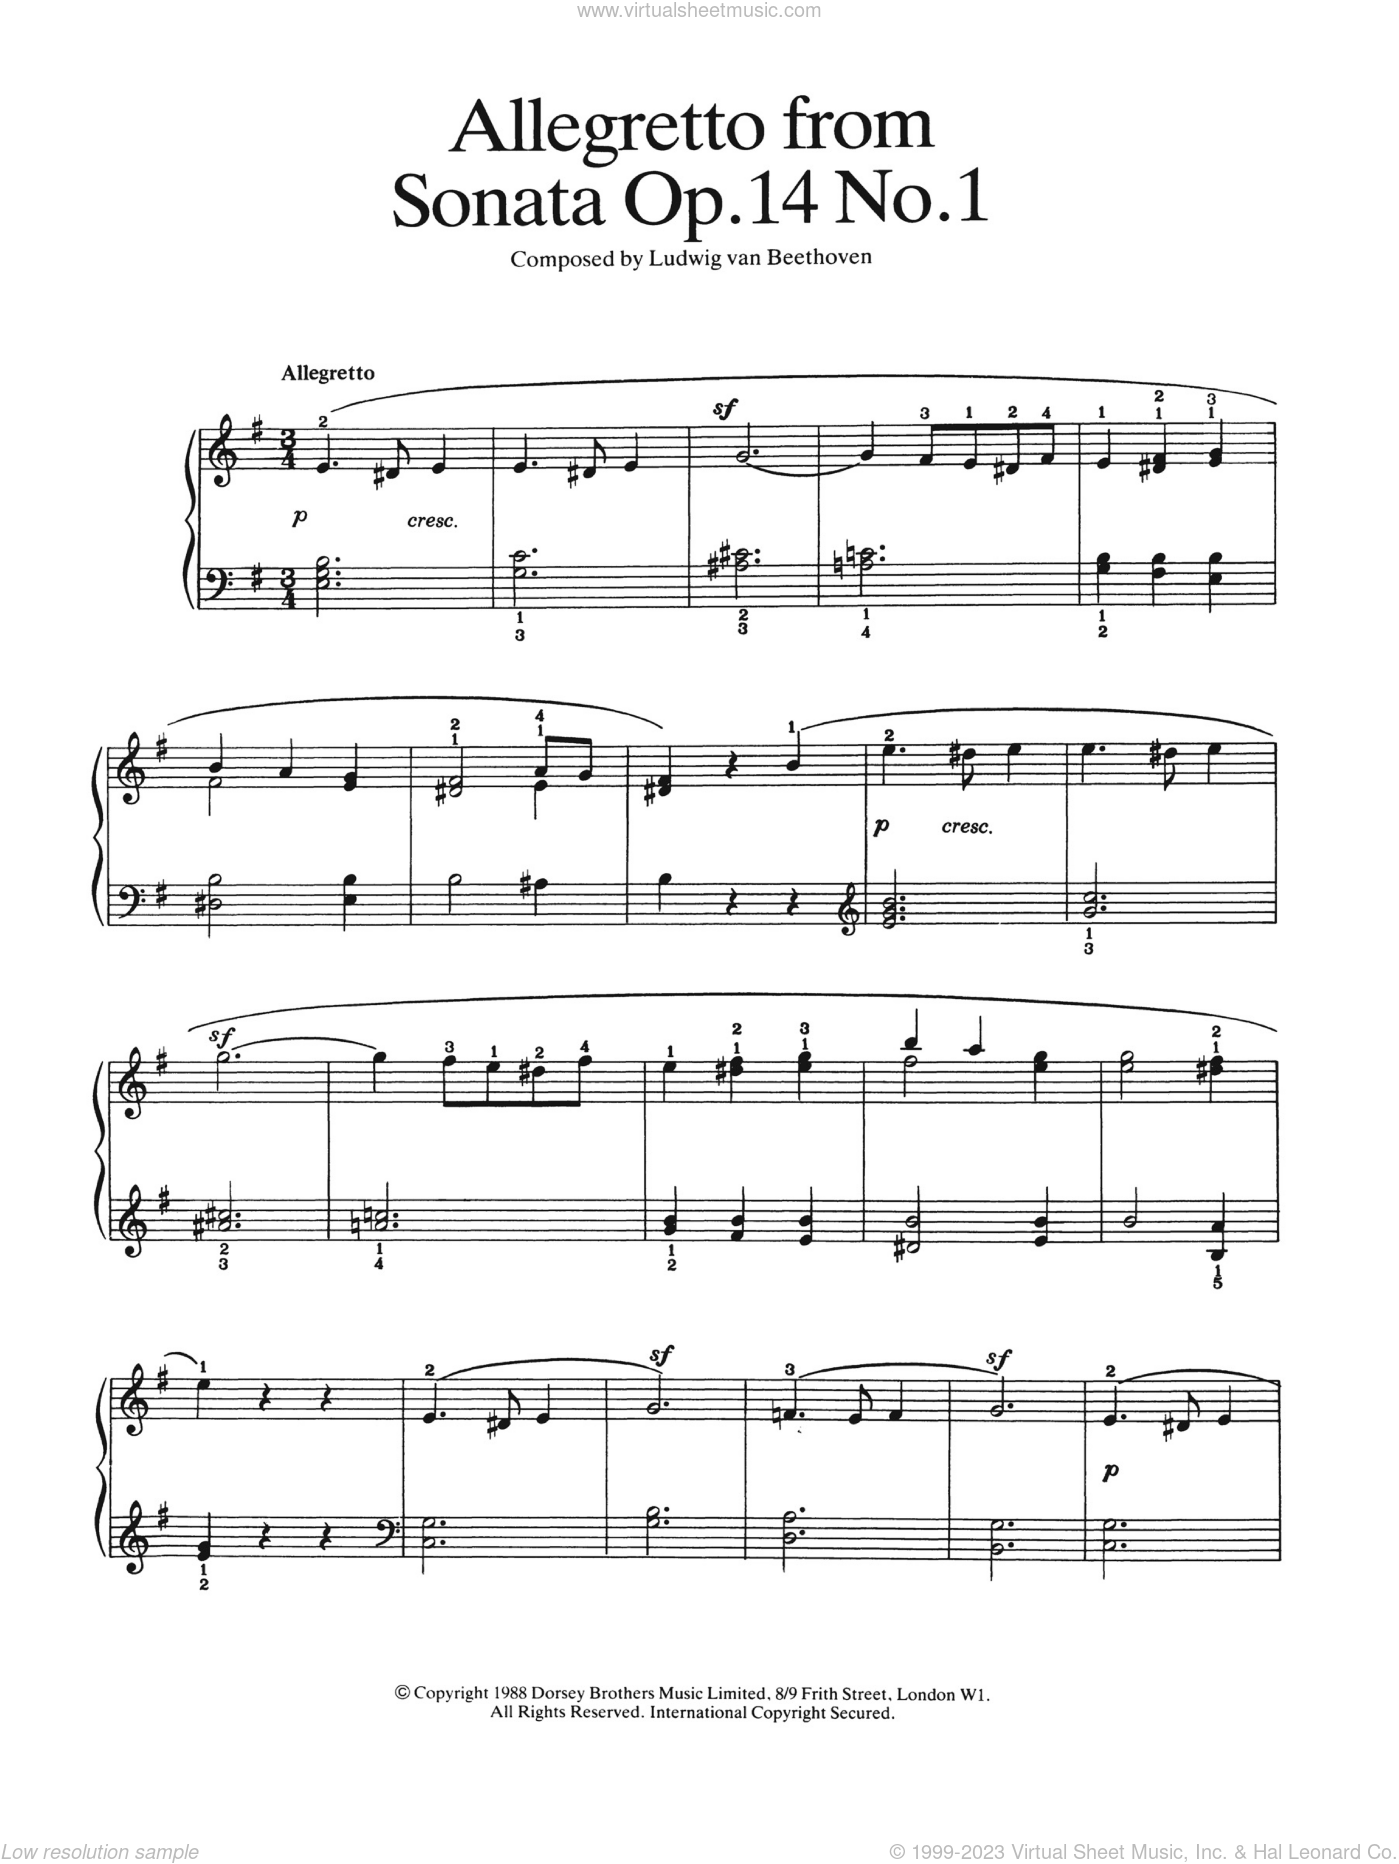 Beethoven - Allegretto from Sonata Op. 14, No. 1 sheet music for piano solo